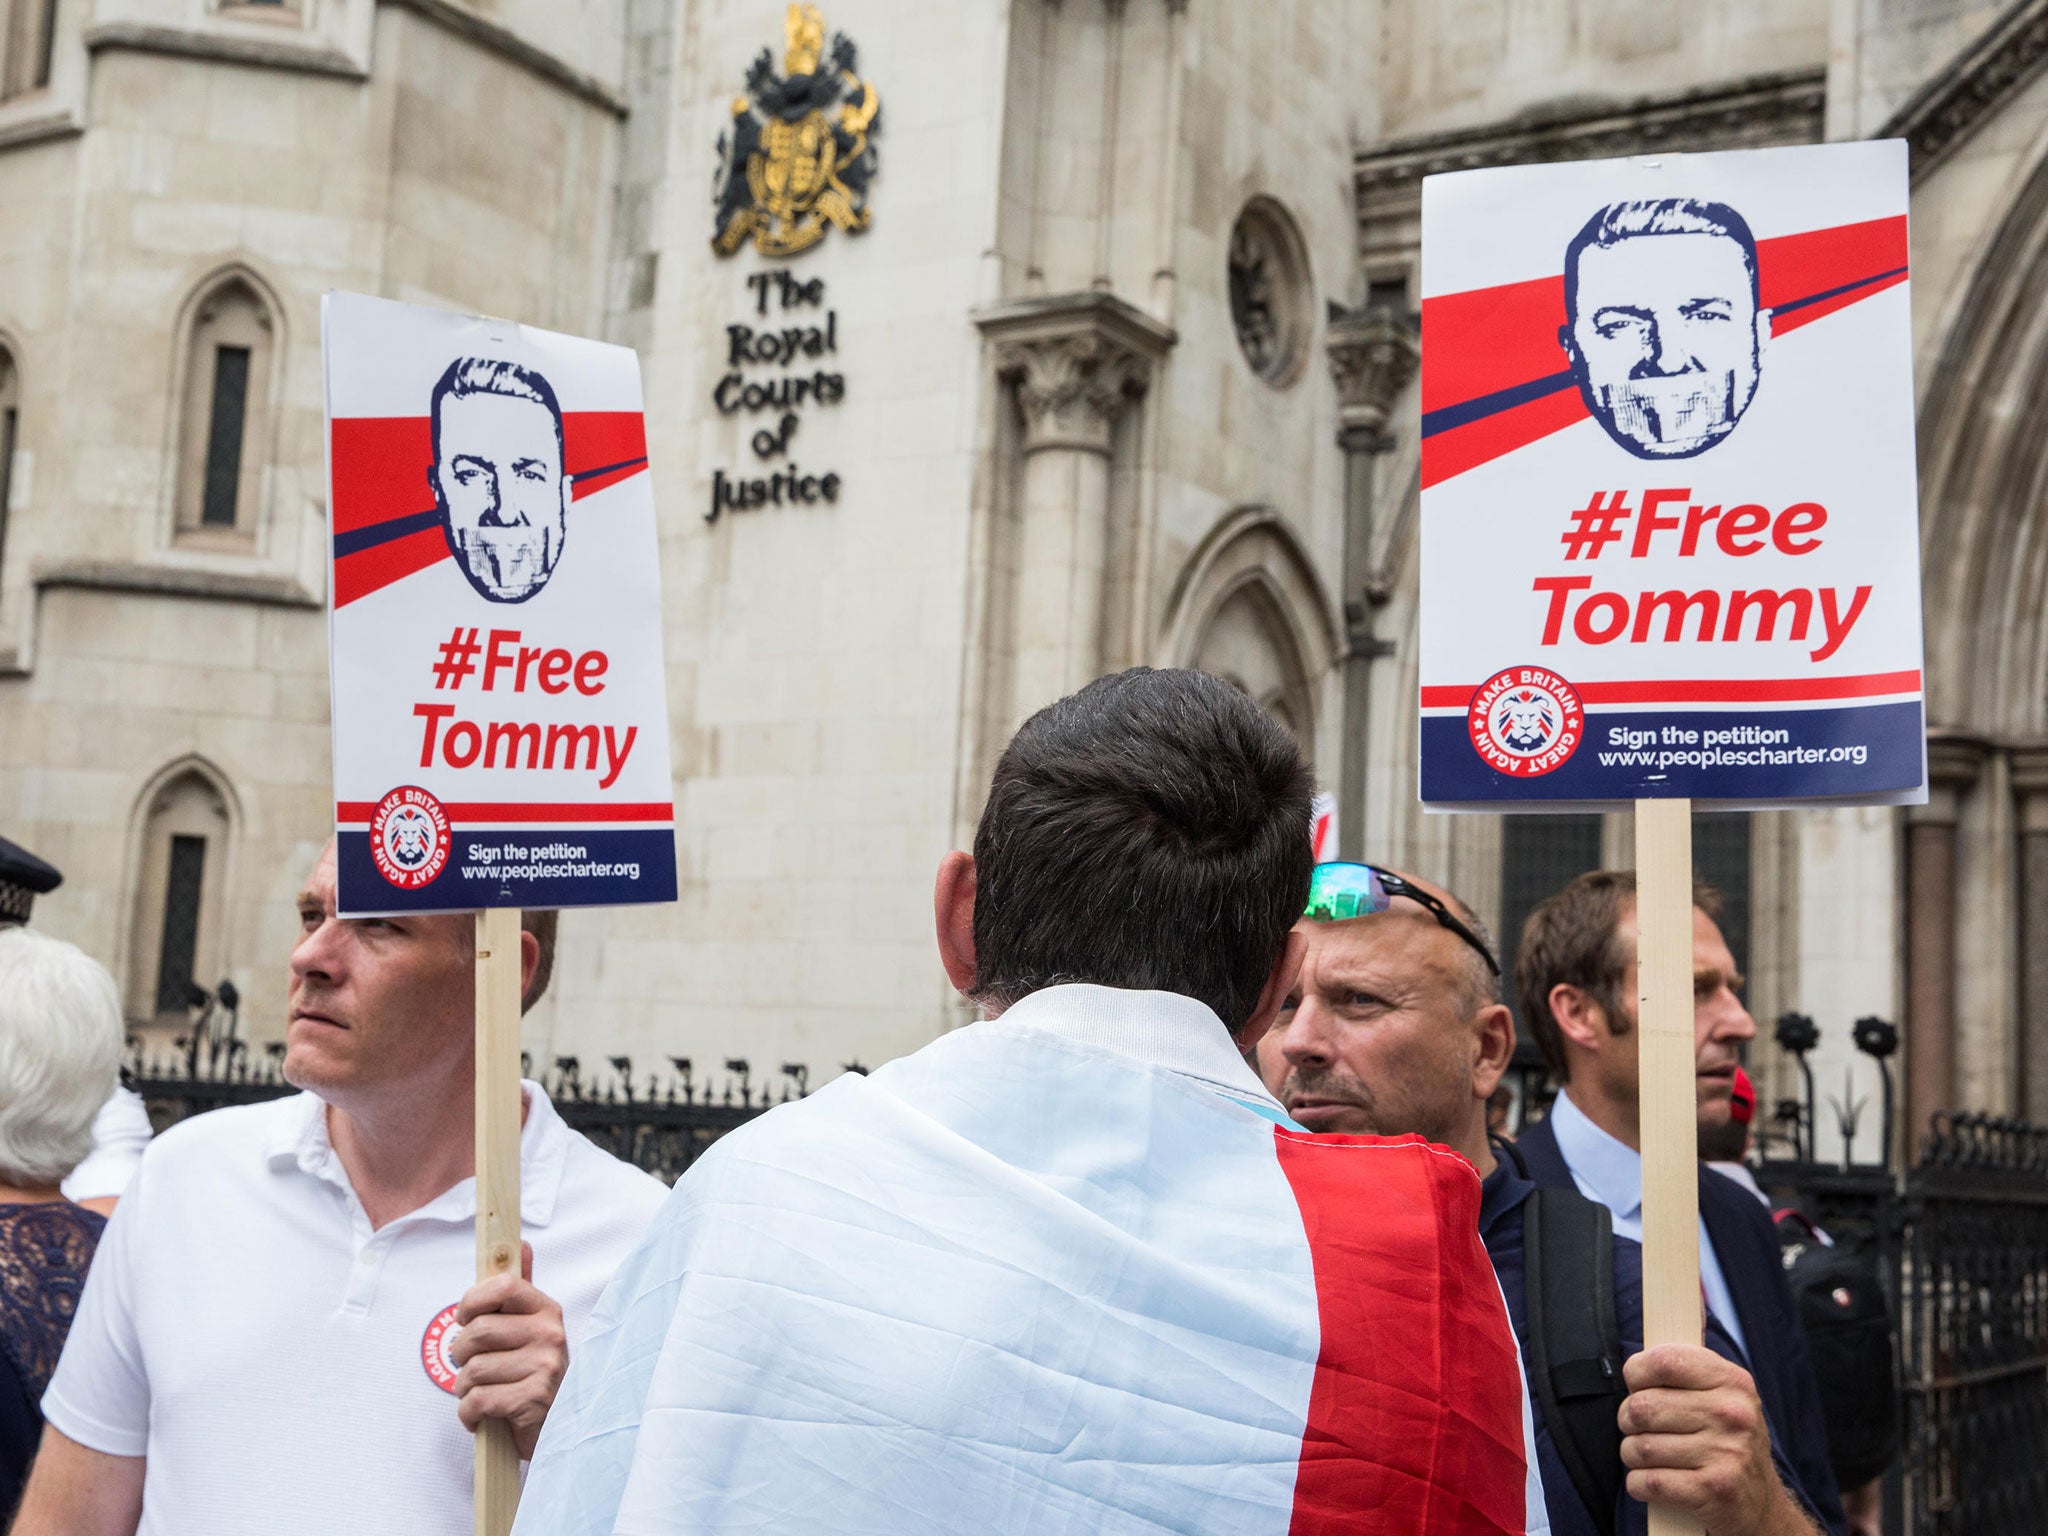 Free Tommy protesters outside the Court of Appeal during a hearing on Tommy Robinson's 13-month prison sentence on 18 July